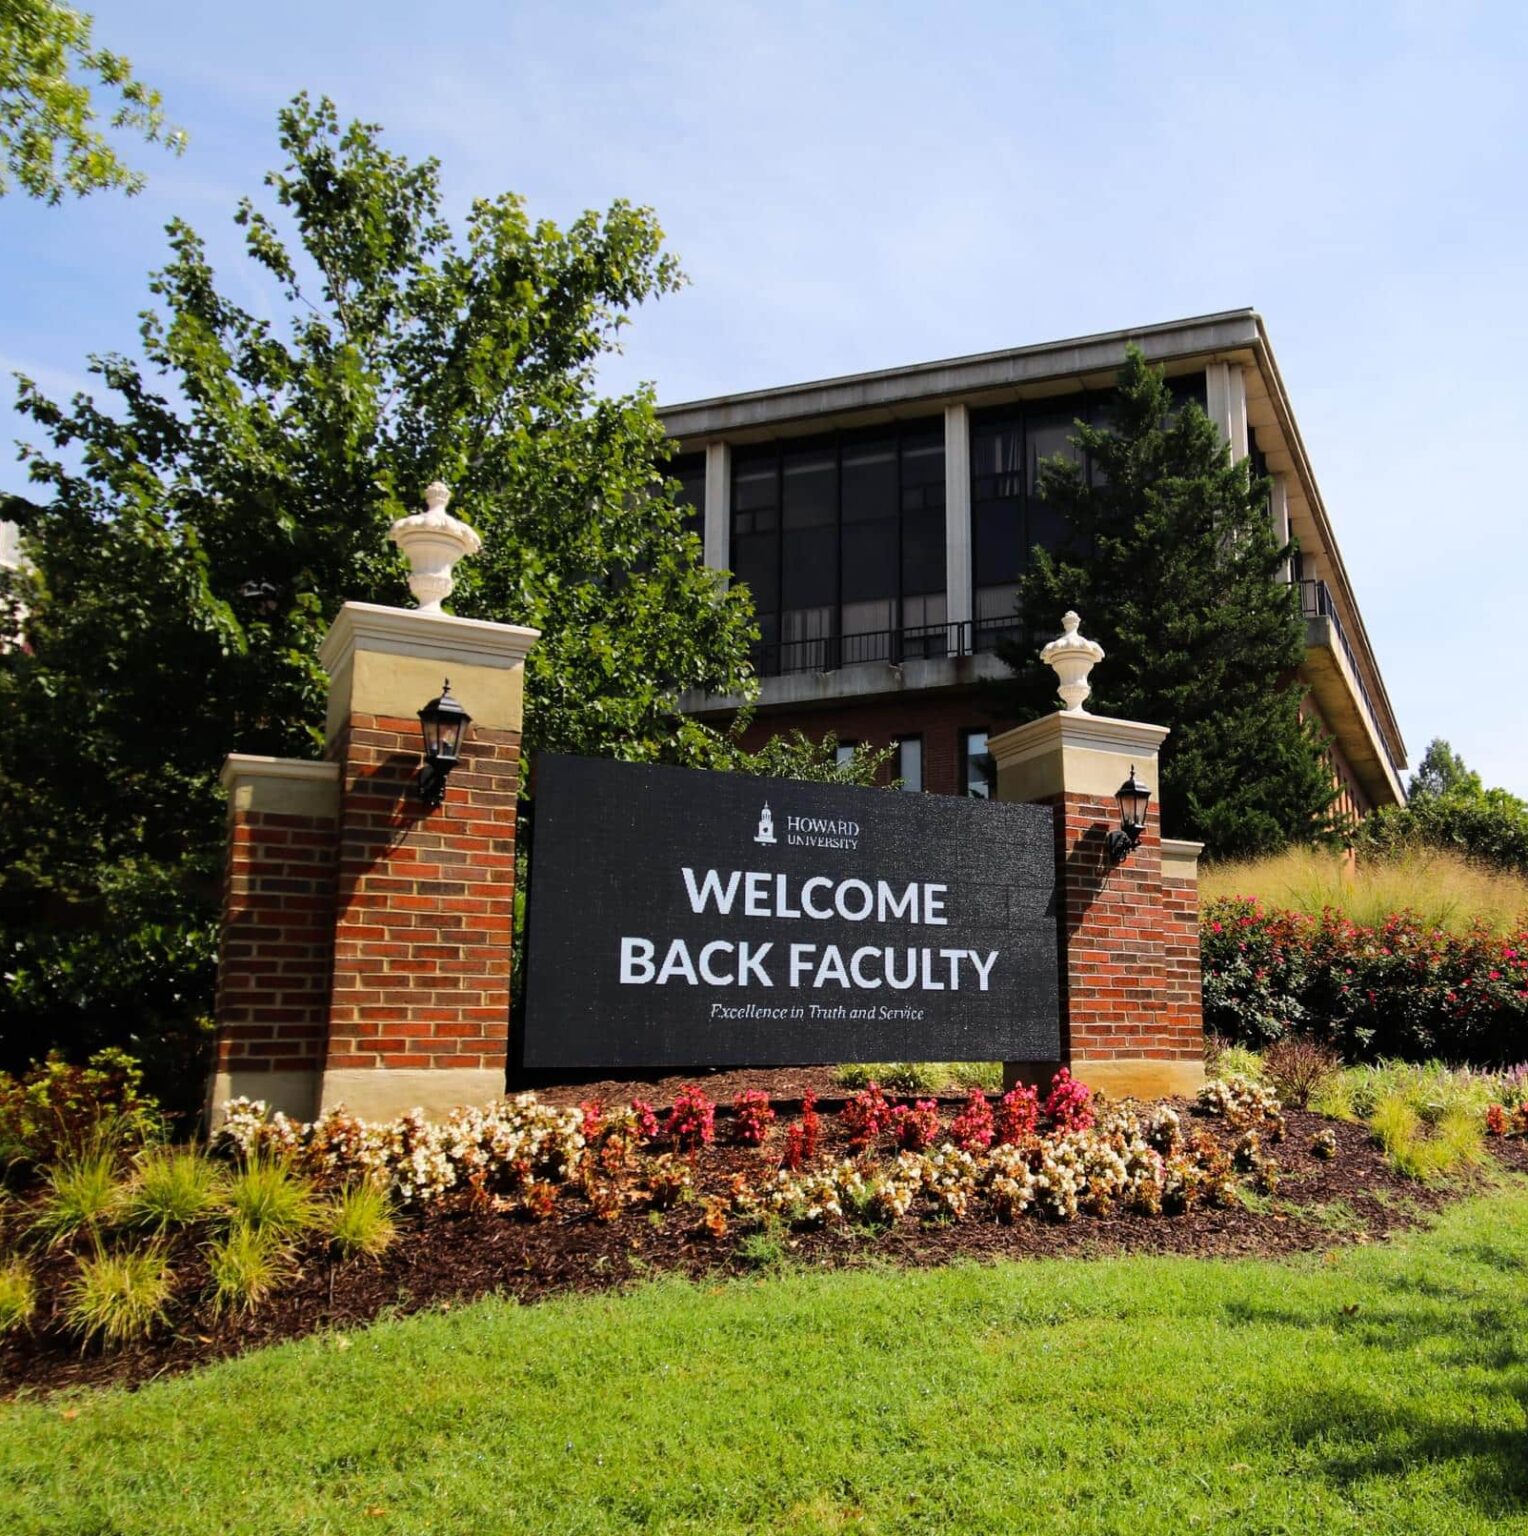 Howard University campus sign displaying the message "Welcome Back Faculty".